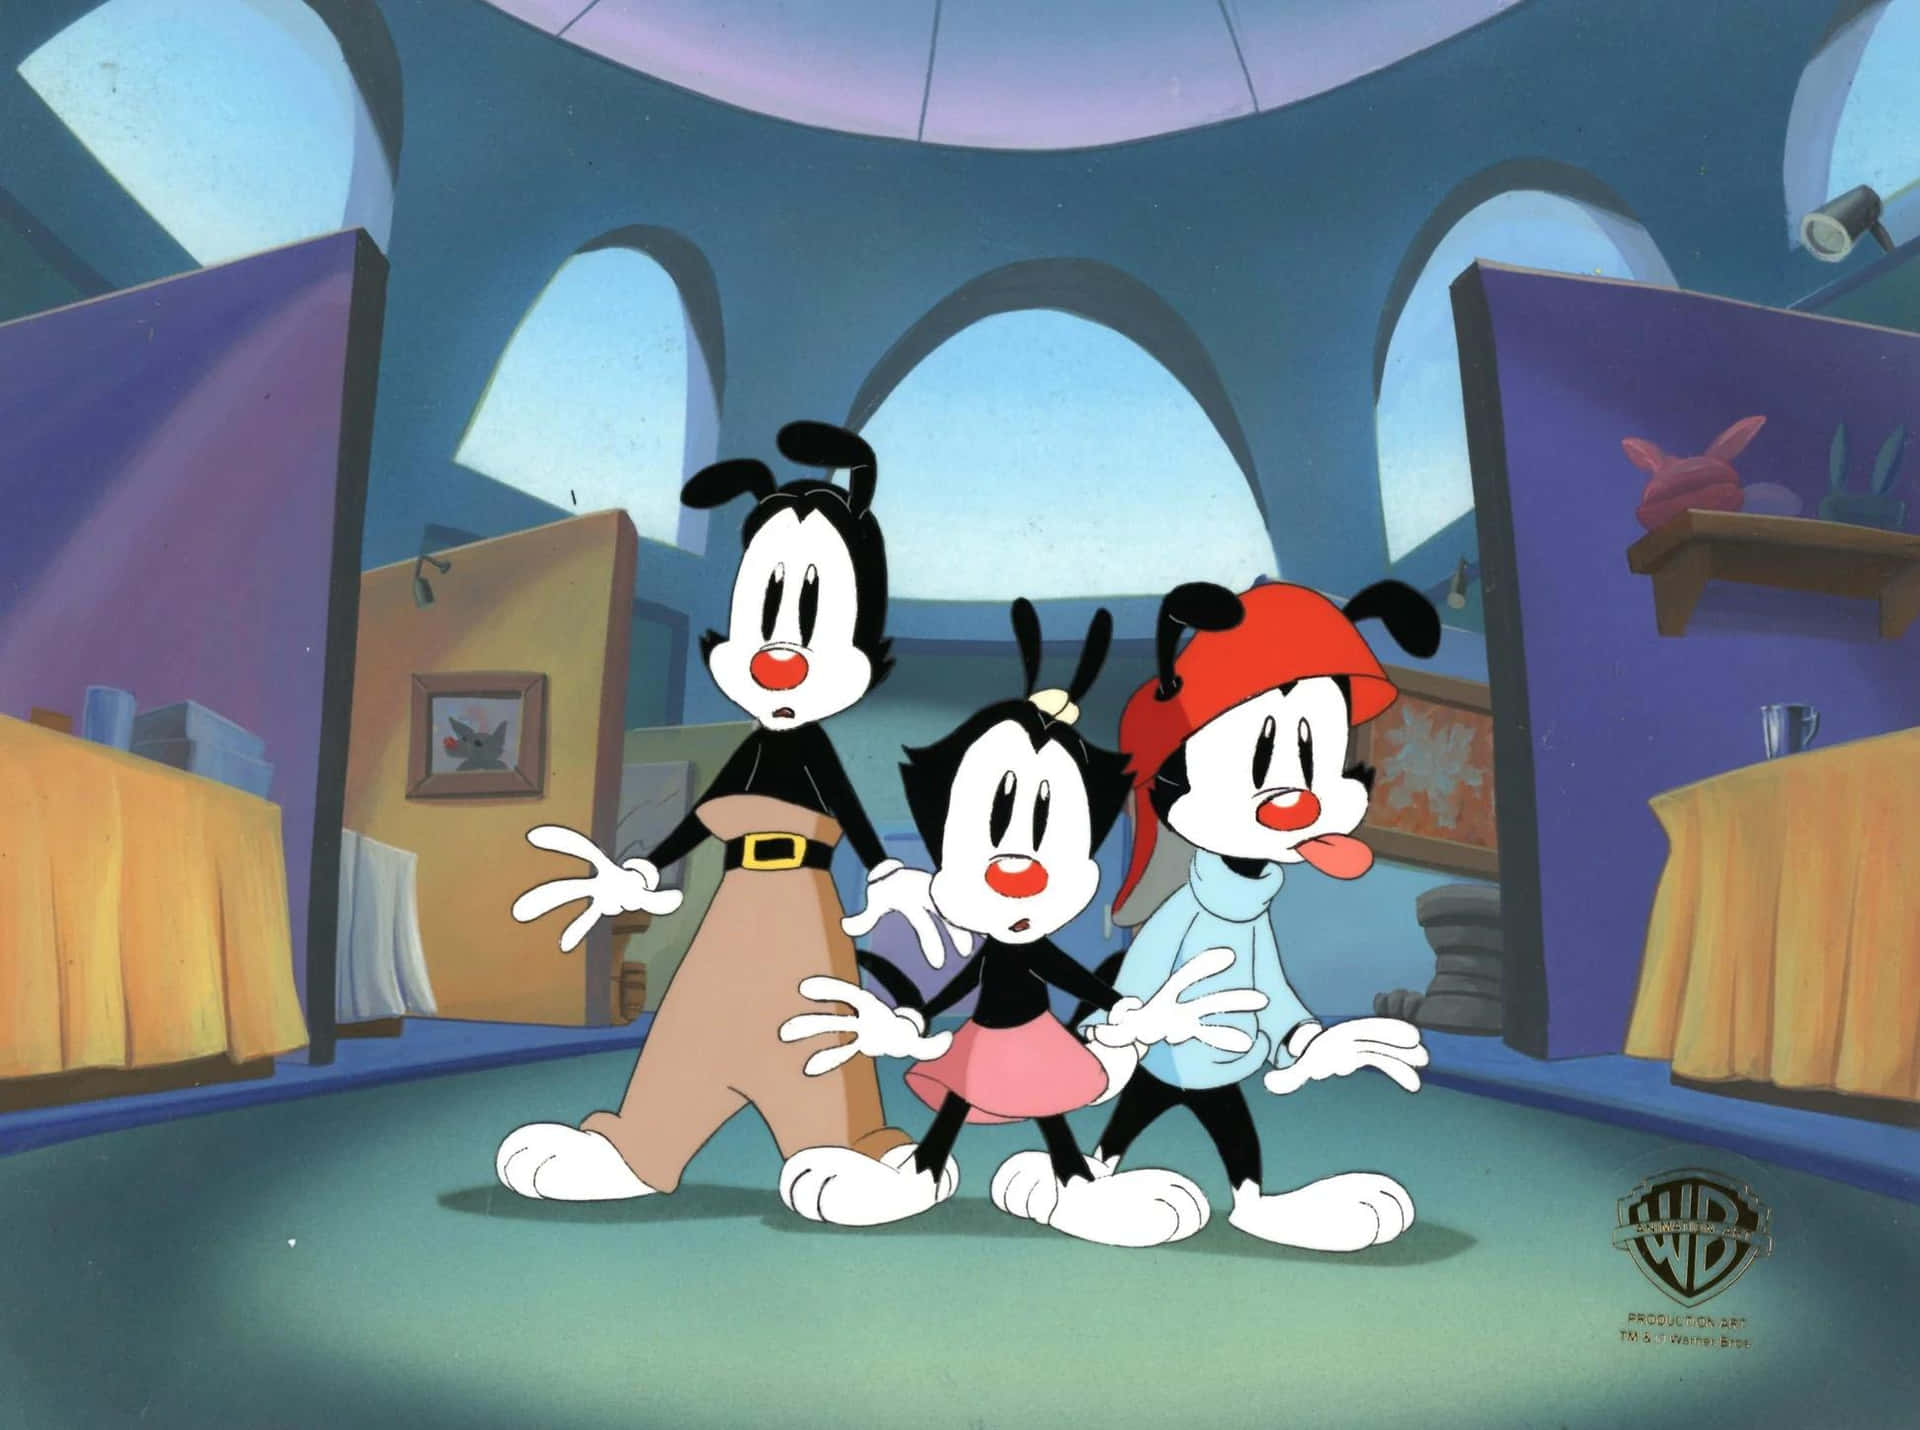 Join in the mischief with Yakko, Wakko and Dot